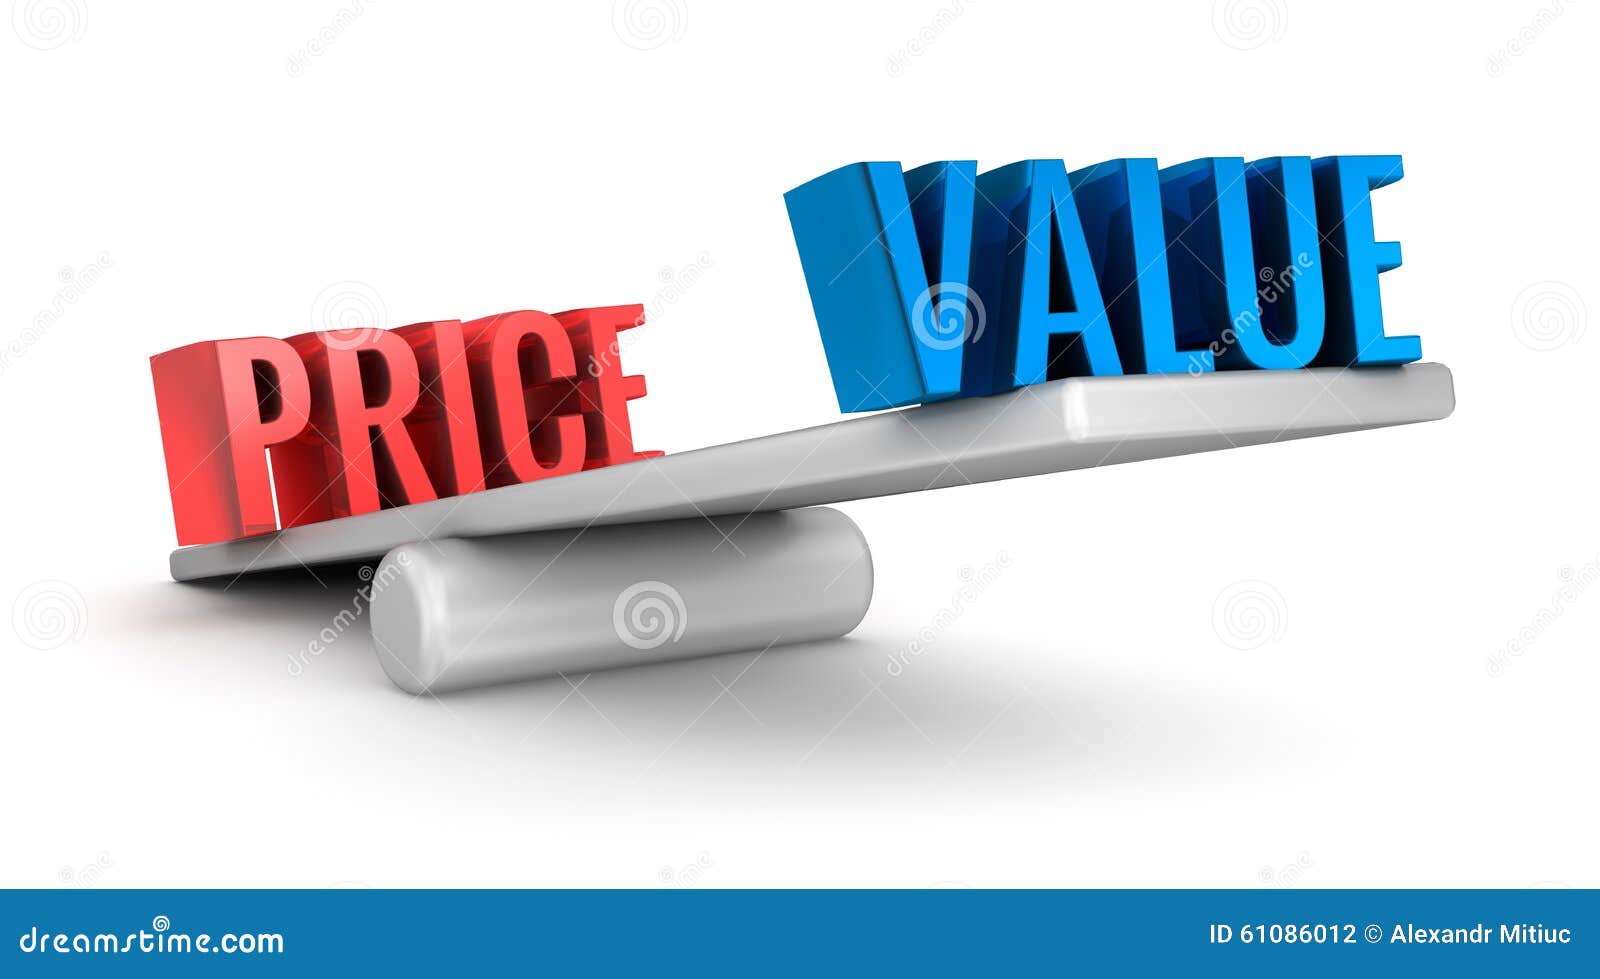 value price scale 3d word concept